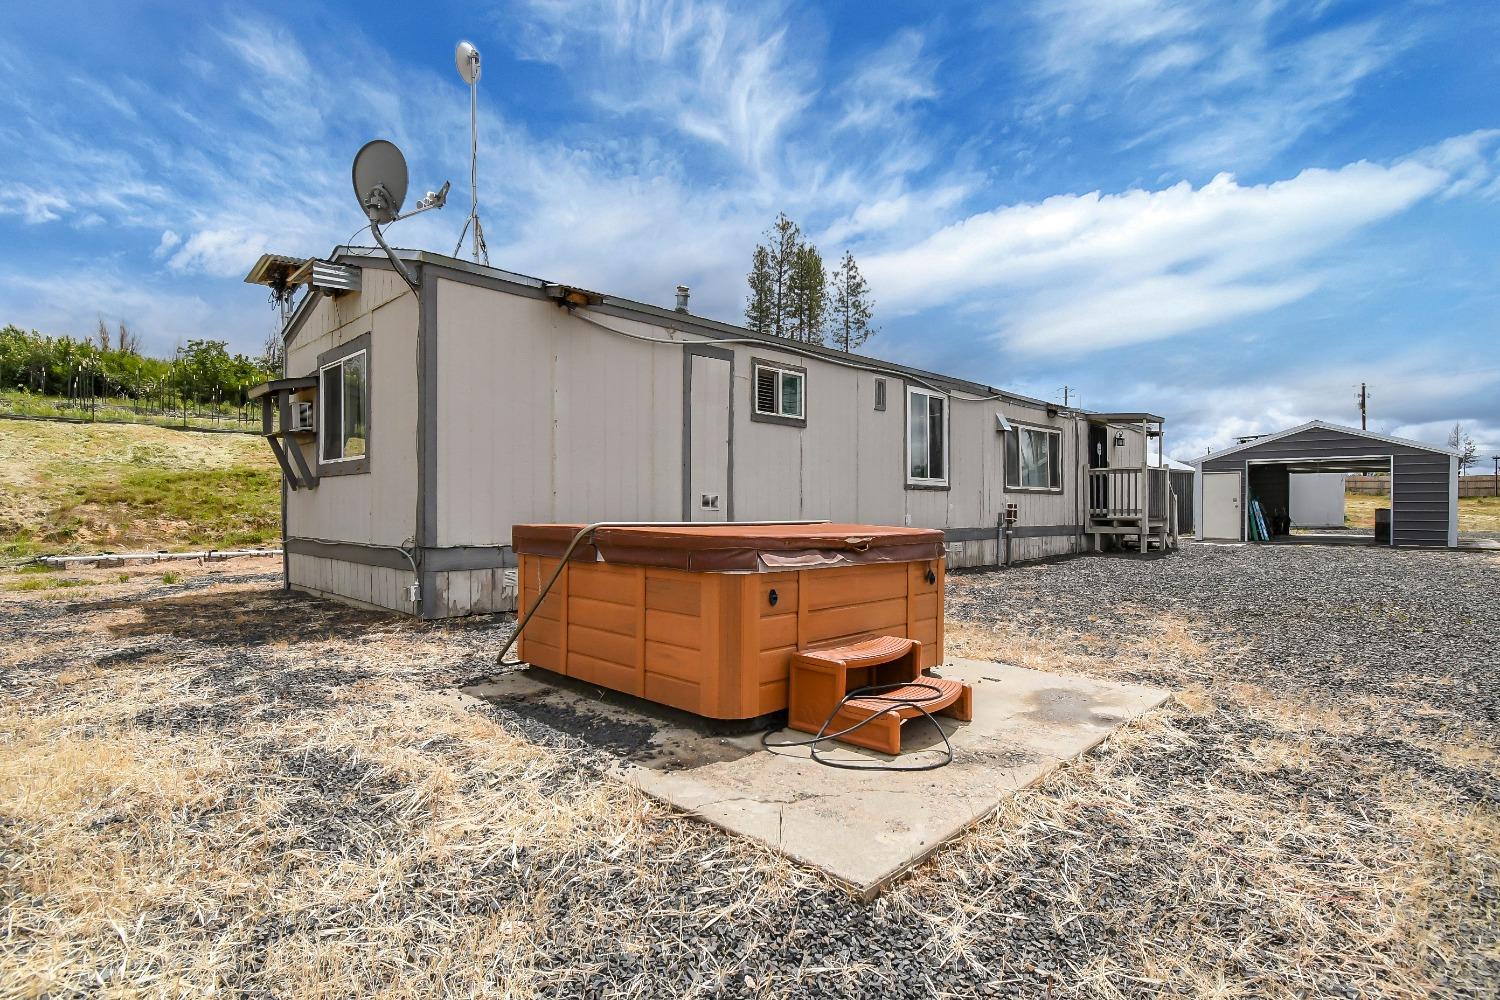 This property has stunning views.  Manufactured home on a permitted, permanent foundation. Three garages, and 18x31, an 18X26, and a 10X20.  Garages are metal and meticulously maintained, and fully permitted. This would be great for the car enthusiast. There is a Built in pool, and a spa.  The manufactured needs work. There is another shed that was going to be an ADU, still could be.  Well irrigation to garden area. Video surveillance to property. Exterior stadium lighting. You could live in this home and build your dream home. More photos coming.